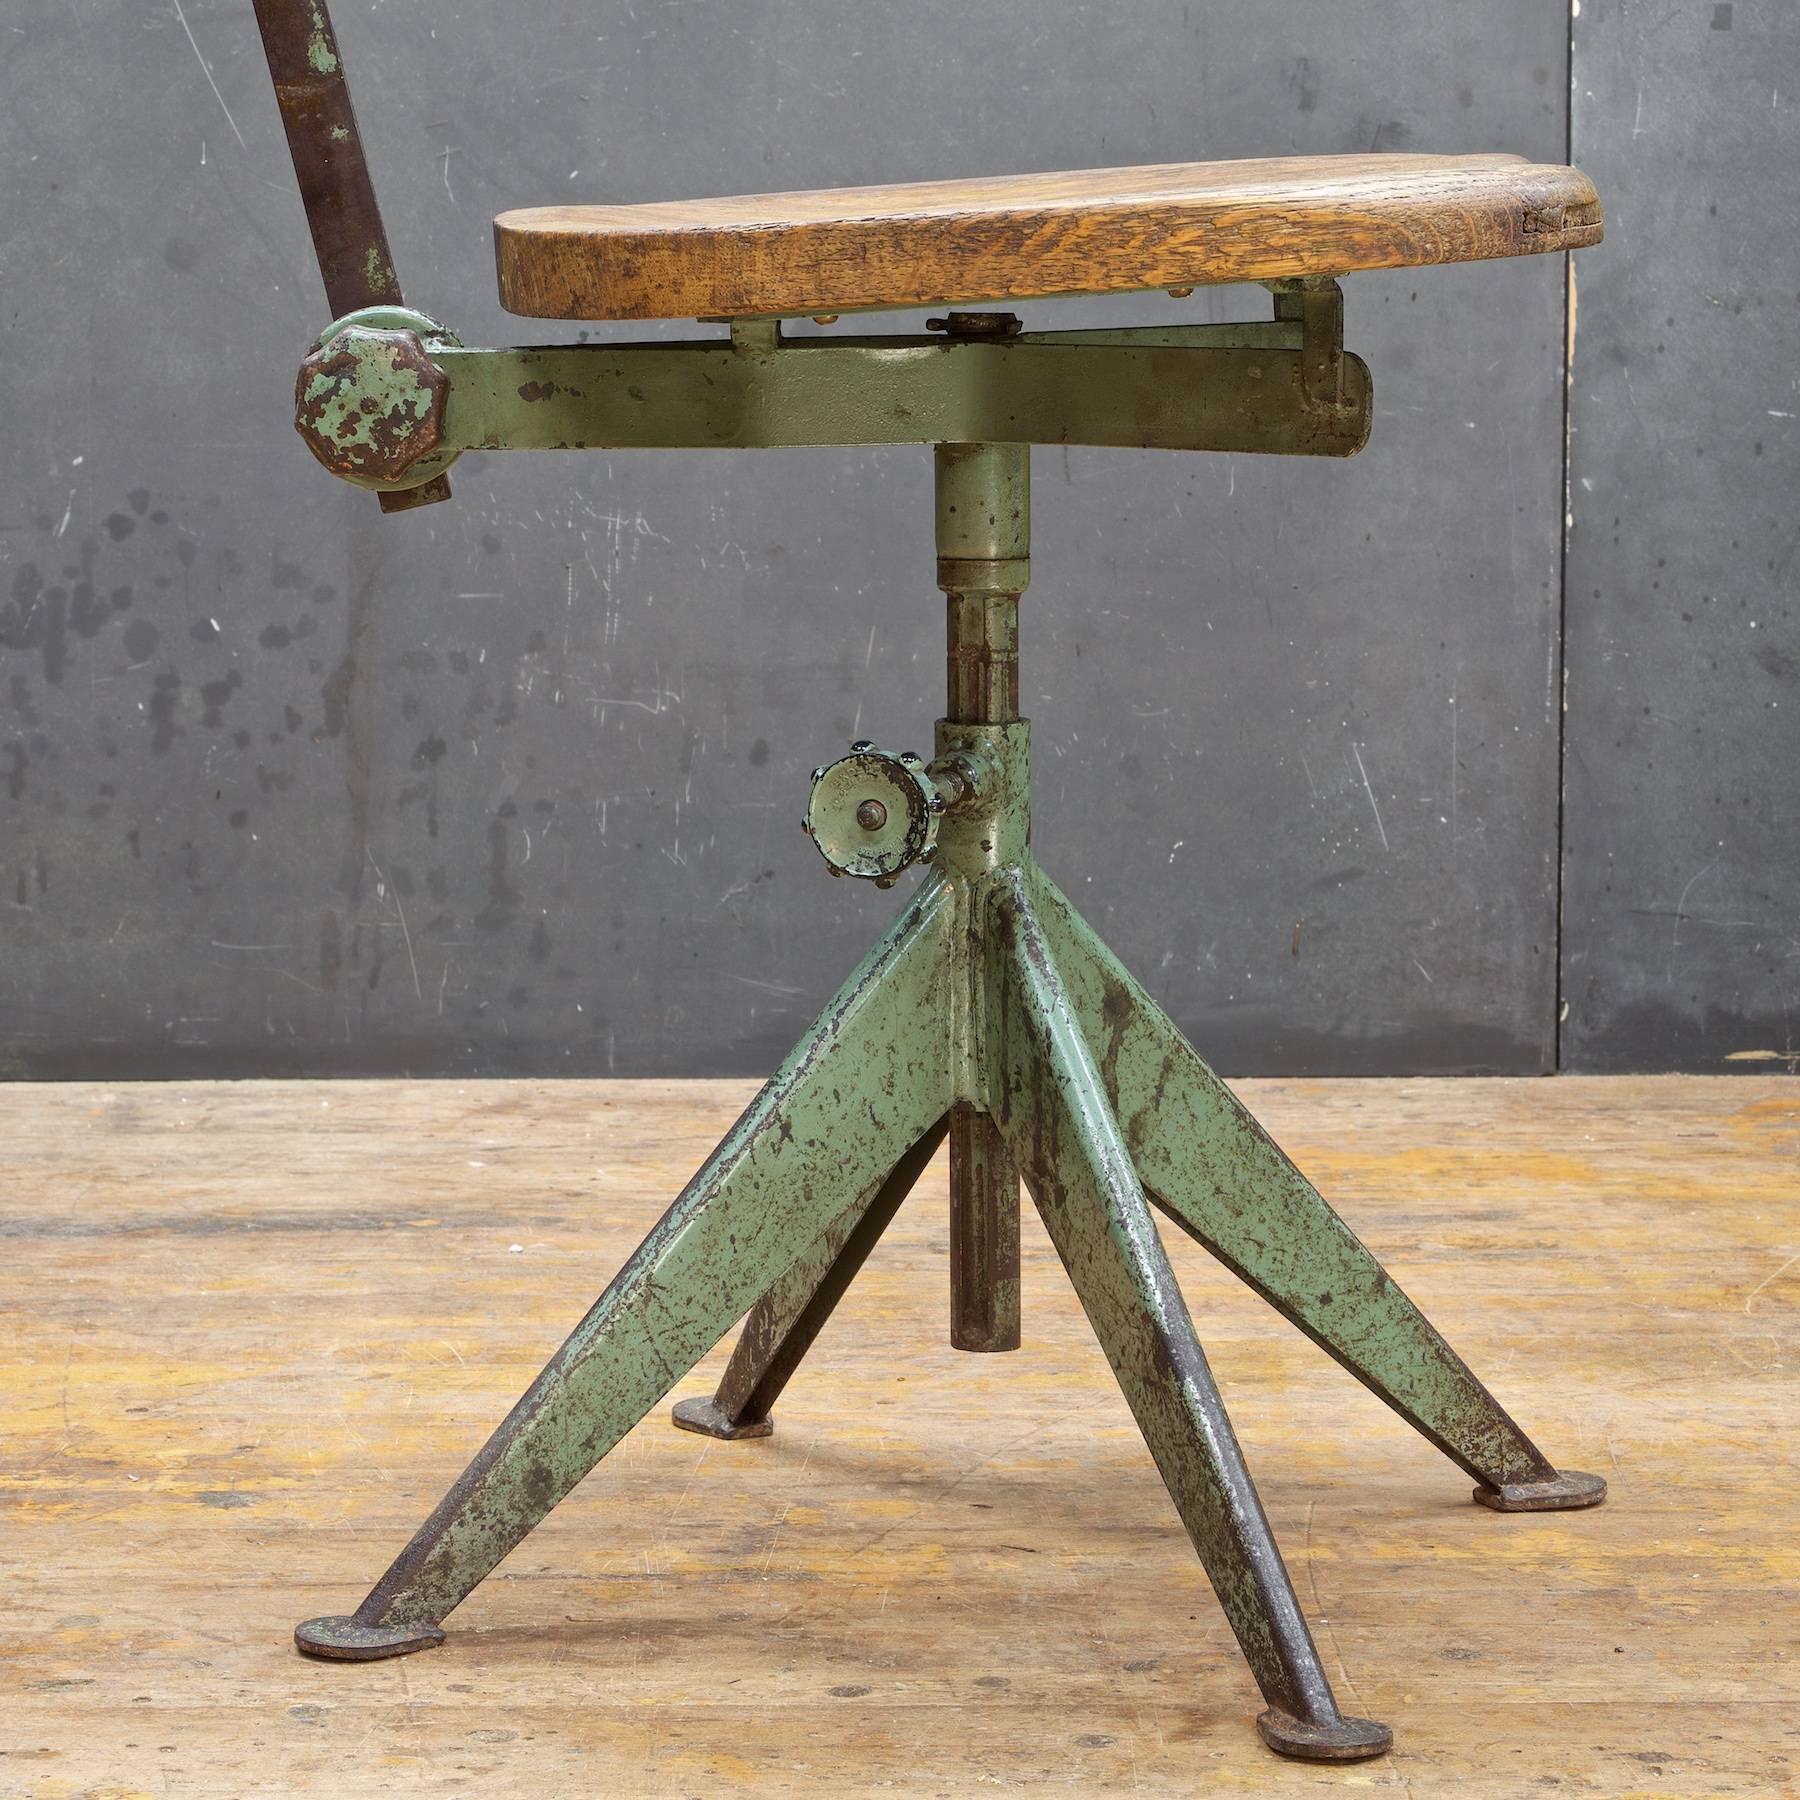 Industrial 1950s Parisian Experfi Bervete Drafting Chair S.G.D.G. Attributed to Jean Prouve